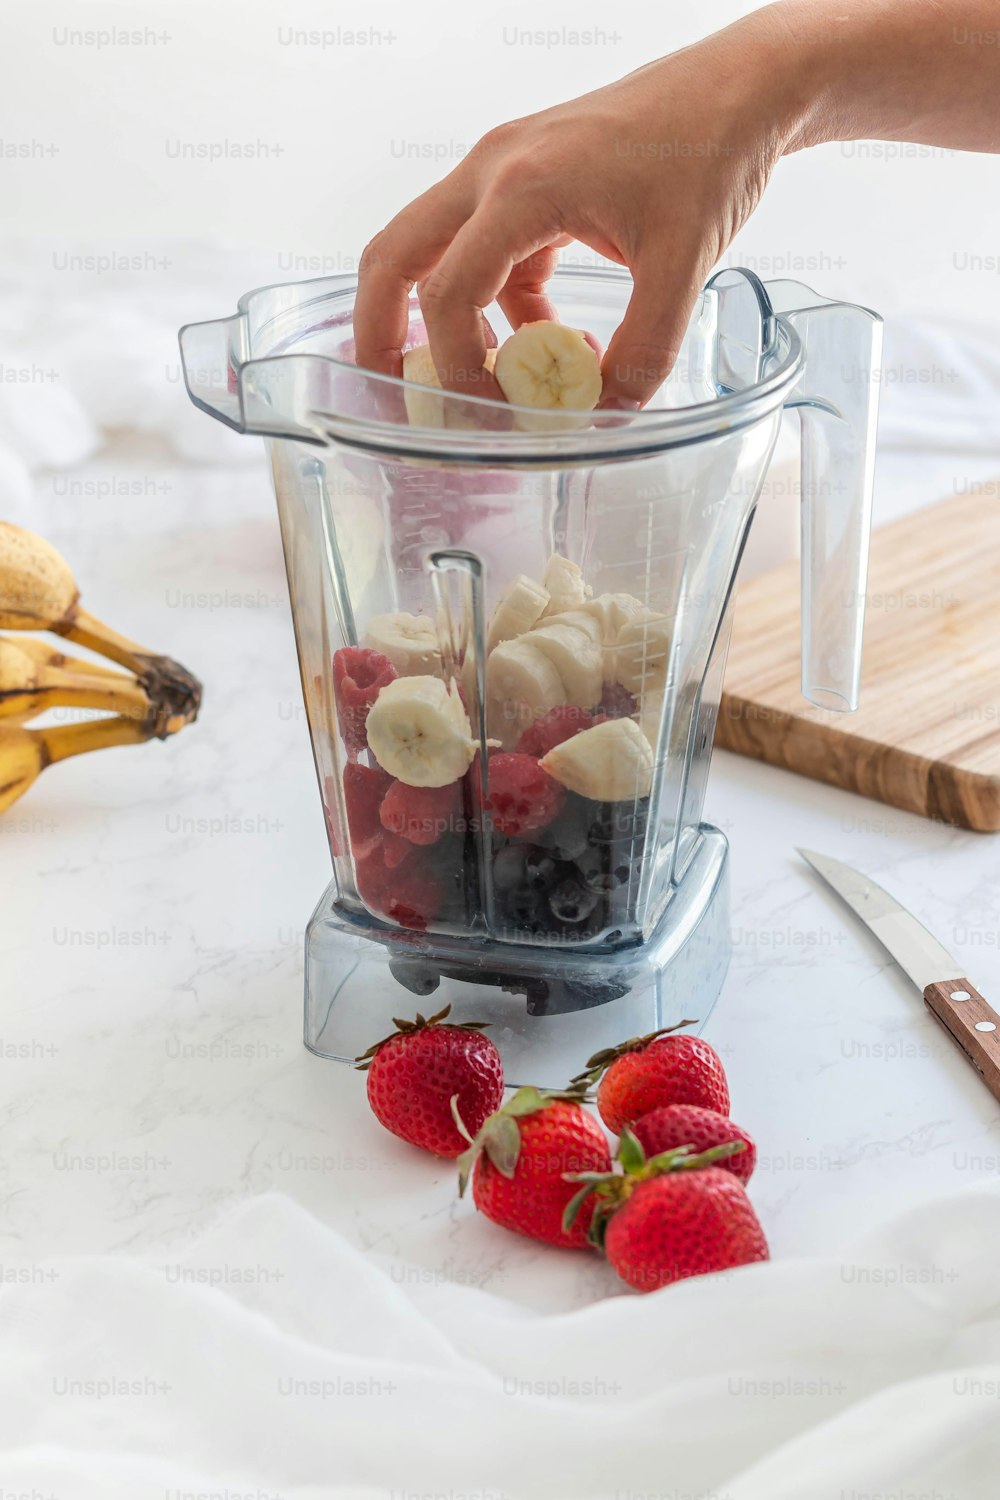 a person is putting bananas and strawberries in a blender